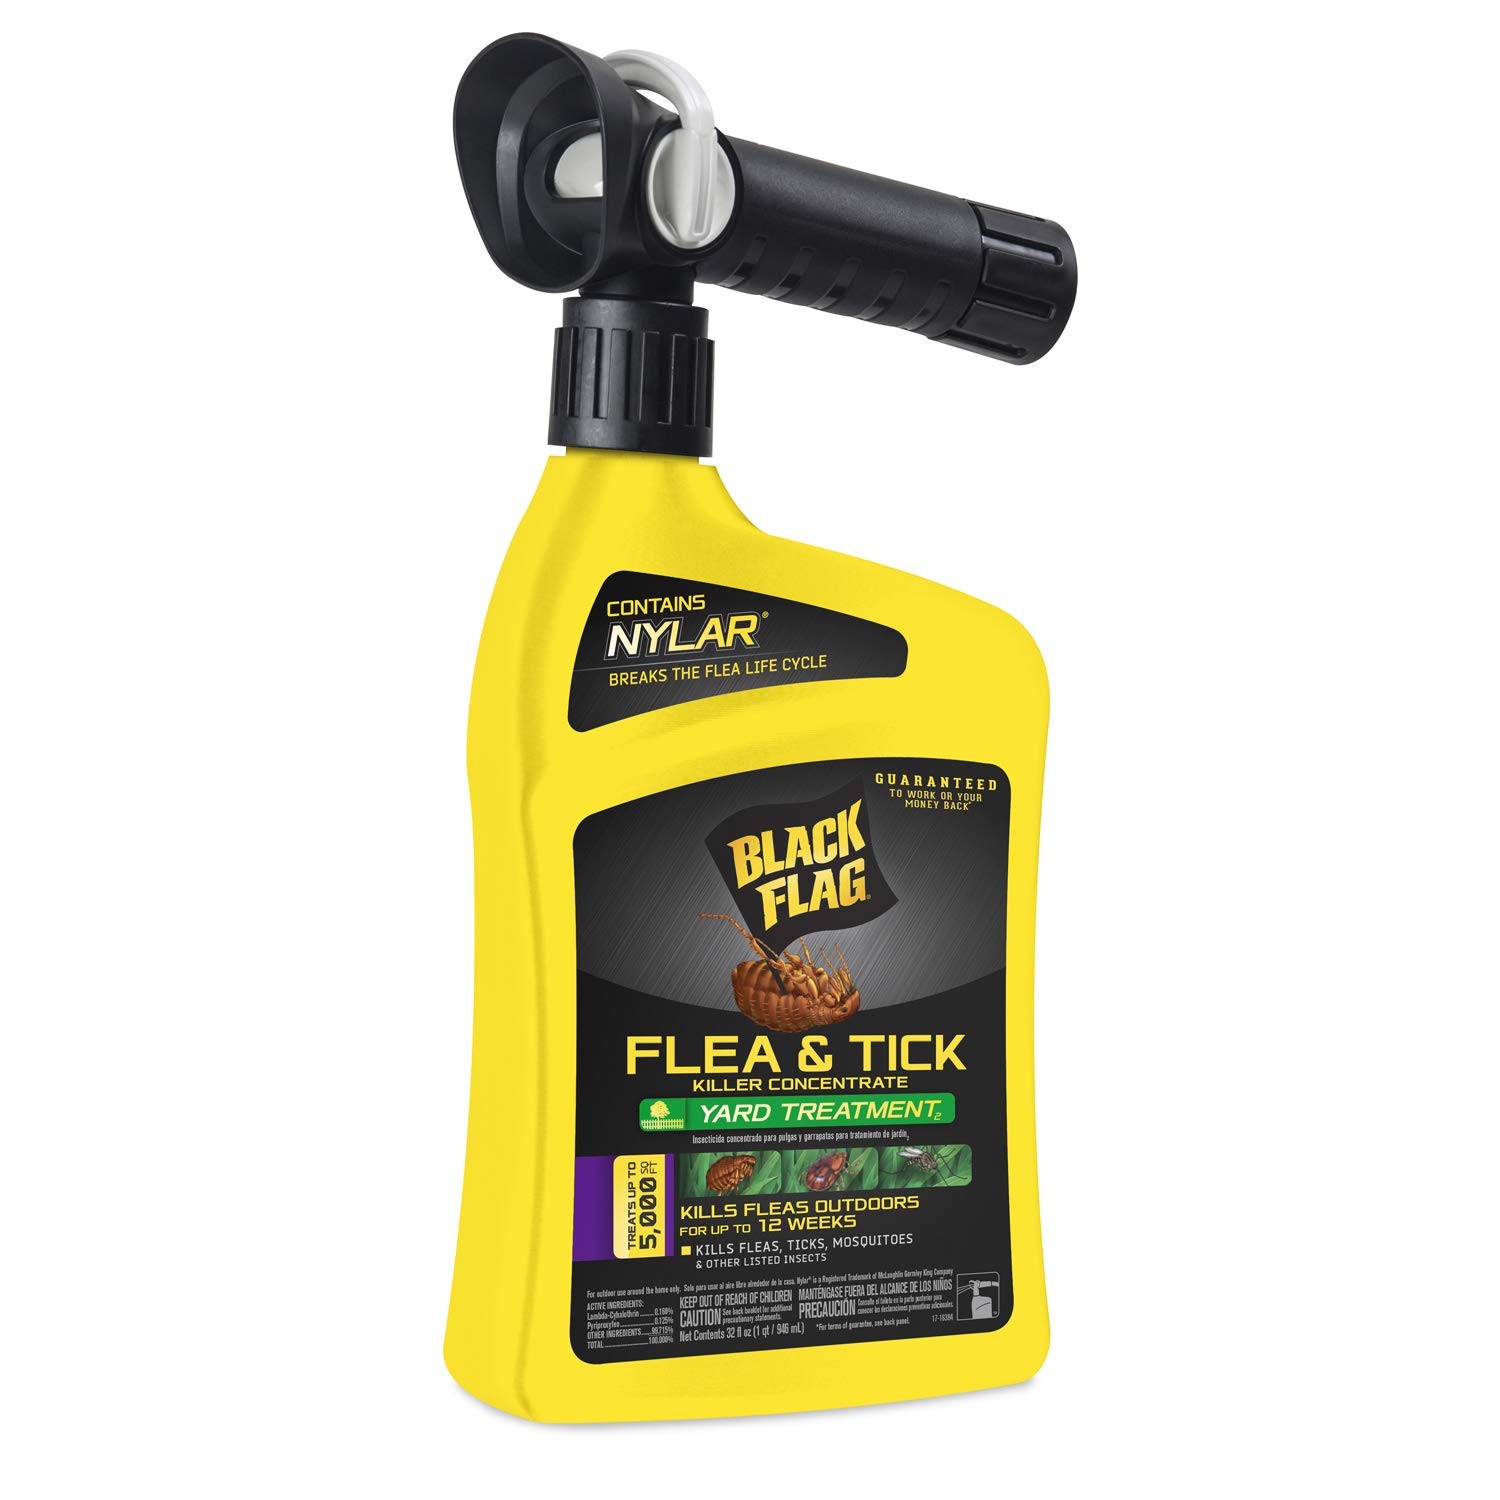 32-Oz Black Flag Flea & Tick Killer Concentrate Ready-to-Spray Yard Treatment $3.50 + Free Shipping w/ Prime or on $35+